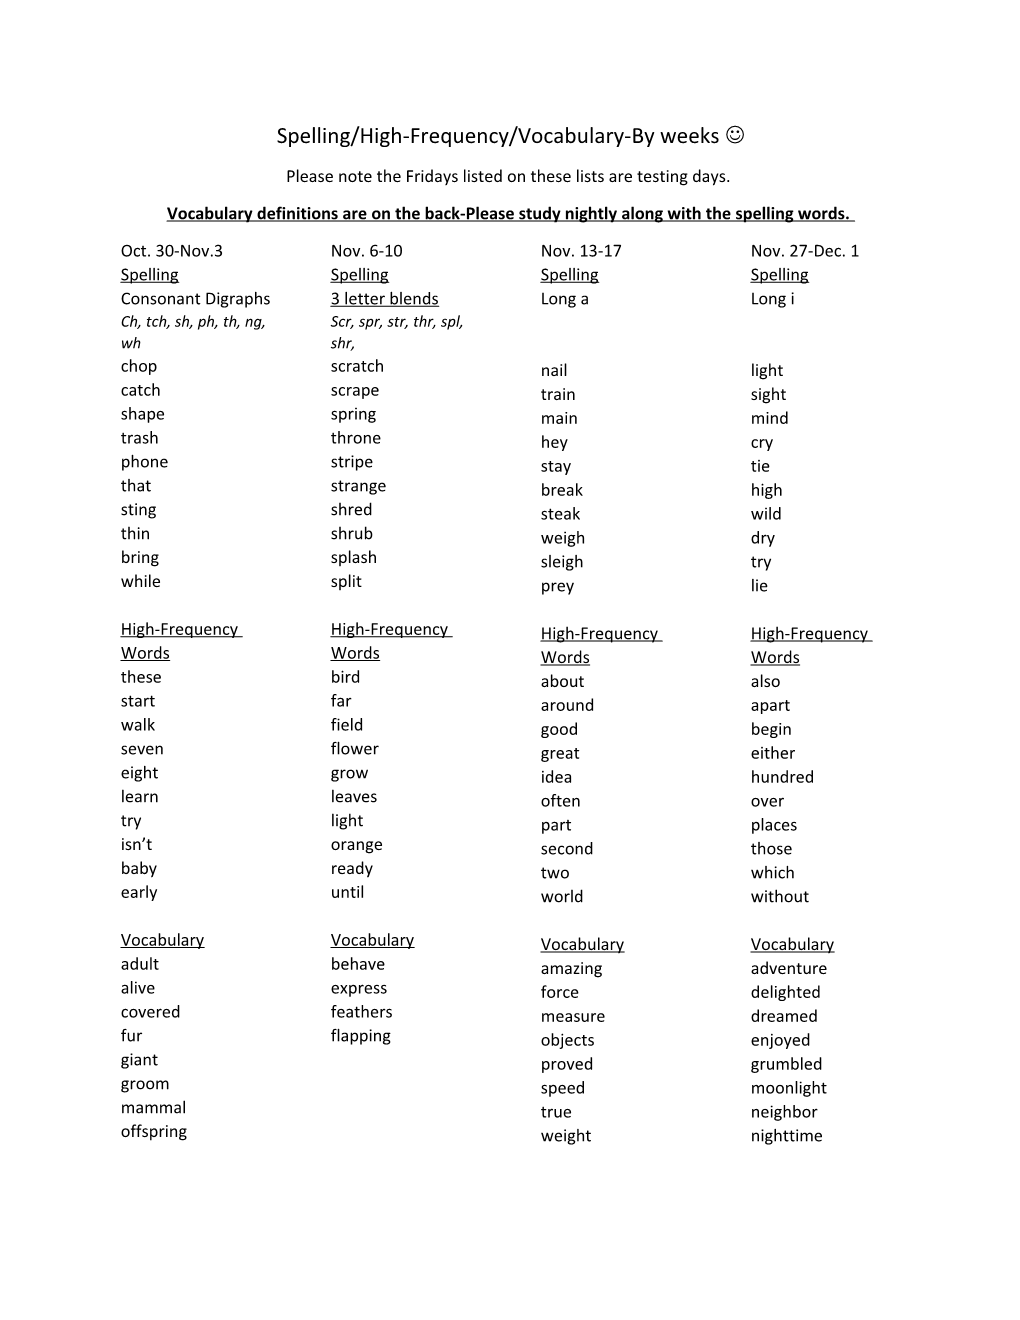 Spelling/High-Frequency/Vocabulary-By Weeks J